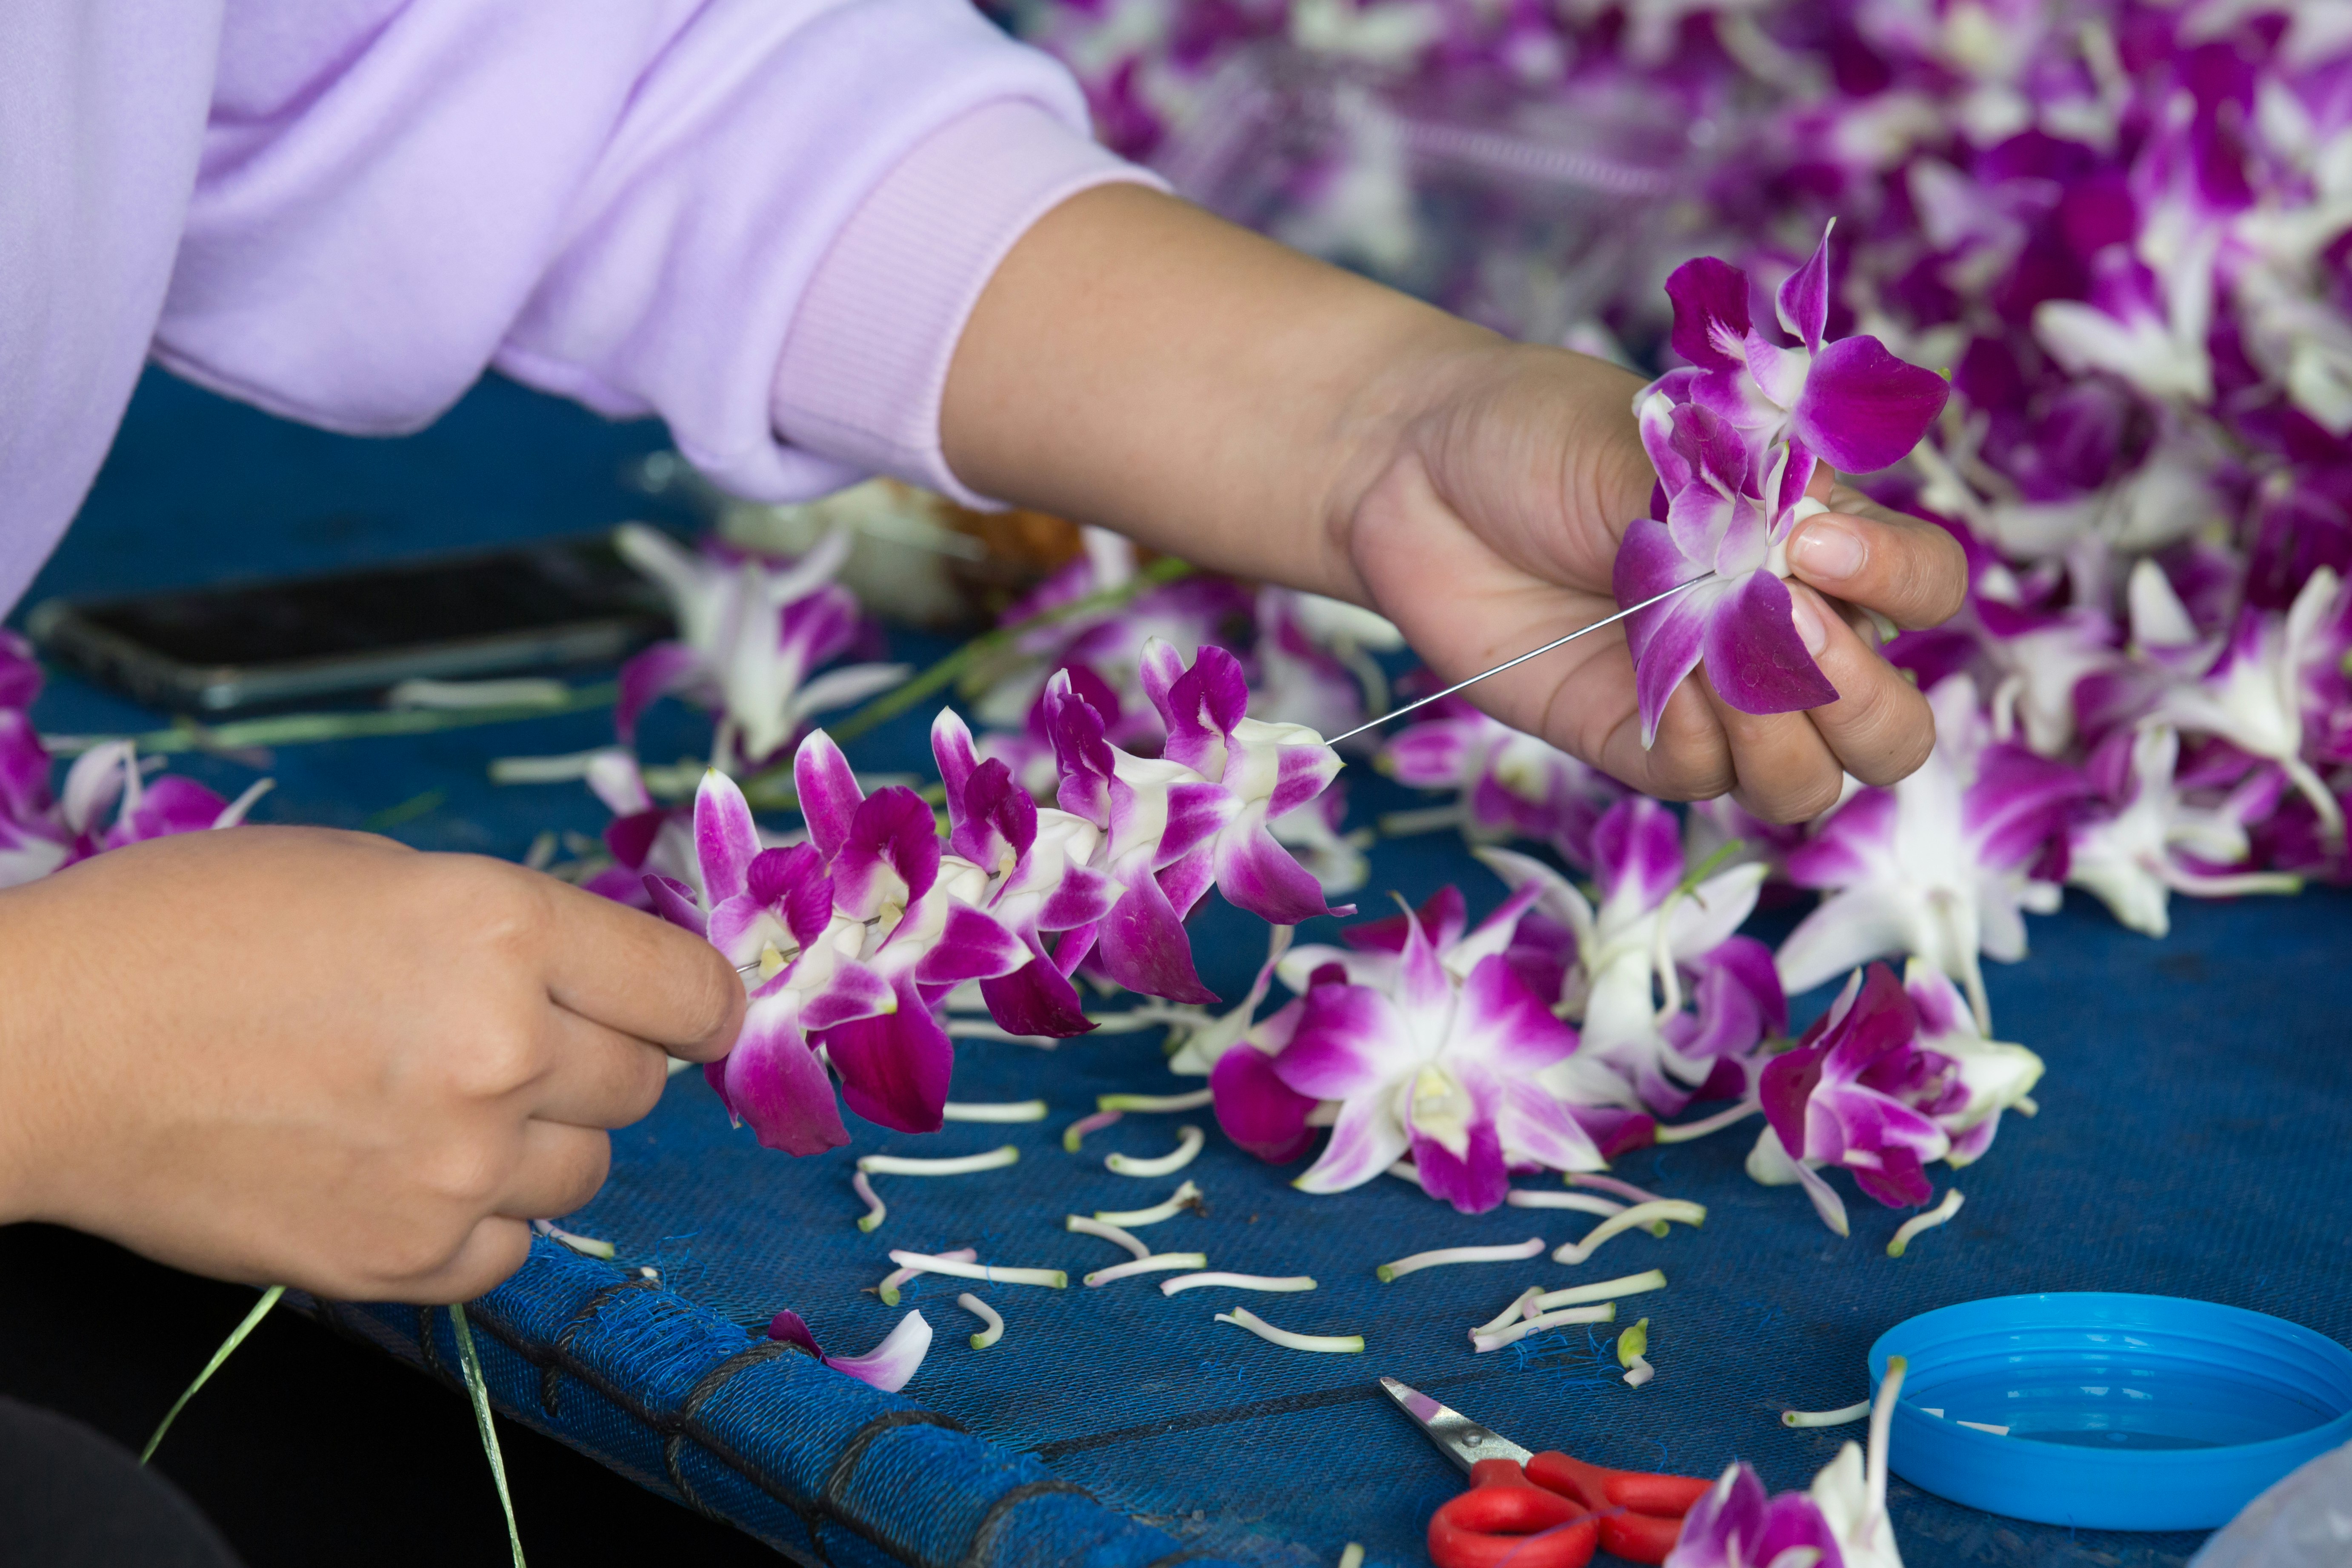 Hands thread petals onto string, forming a lei